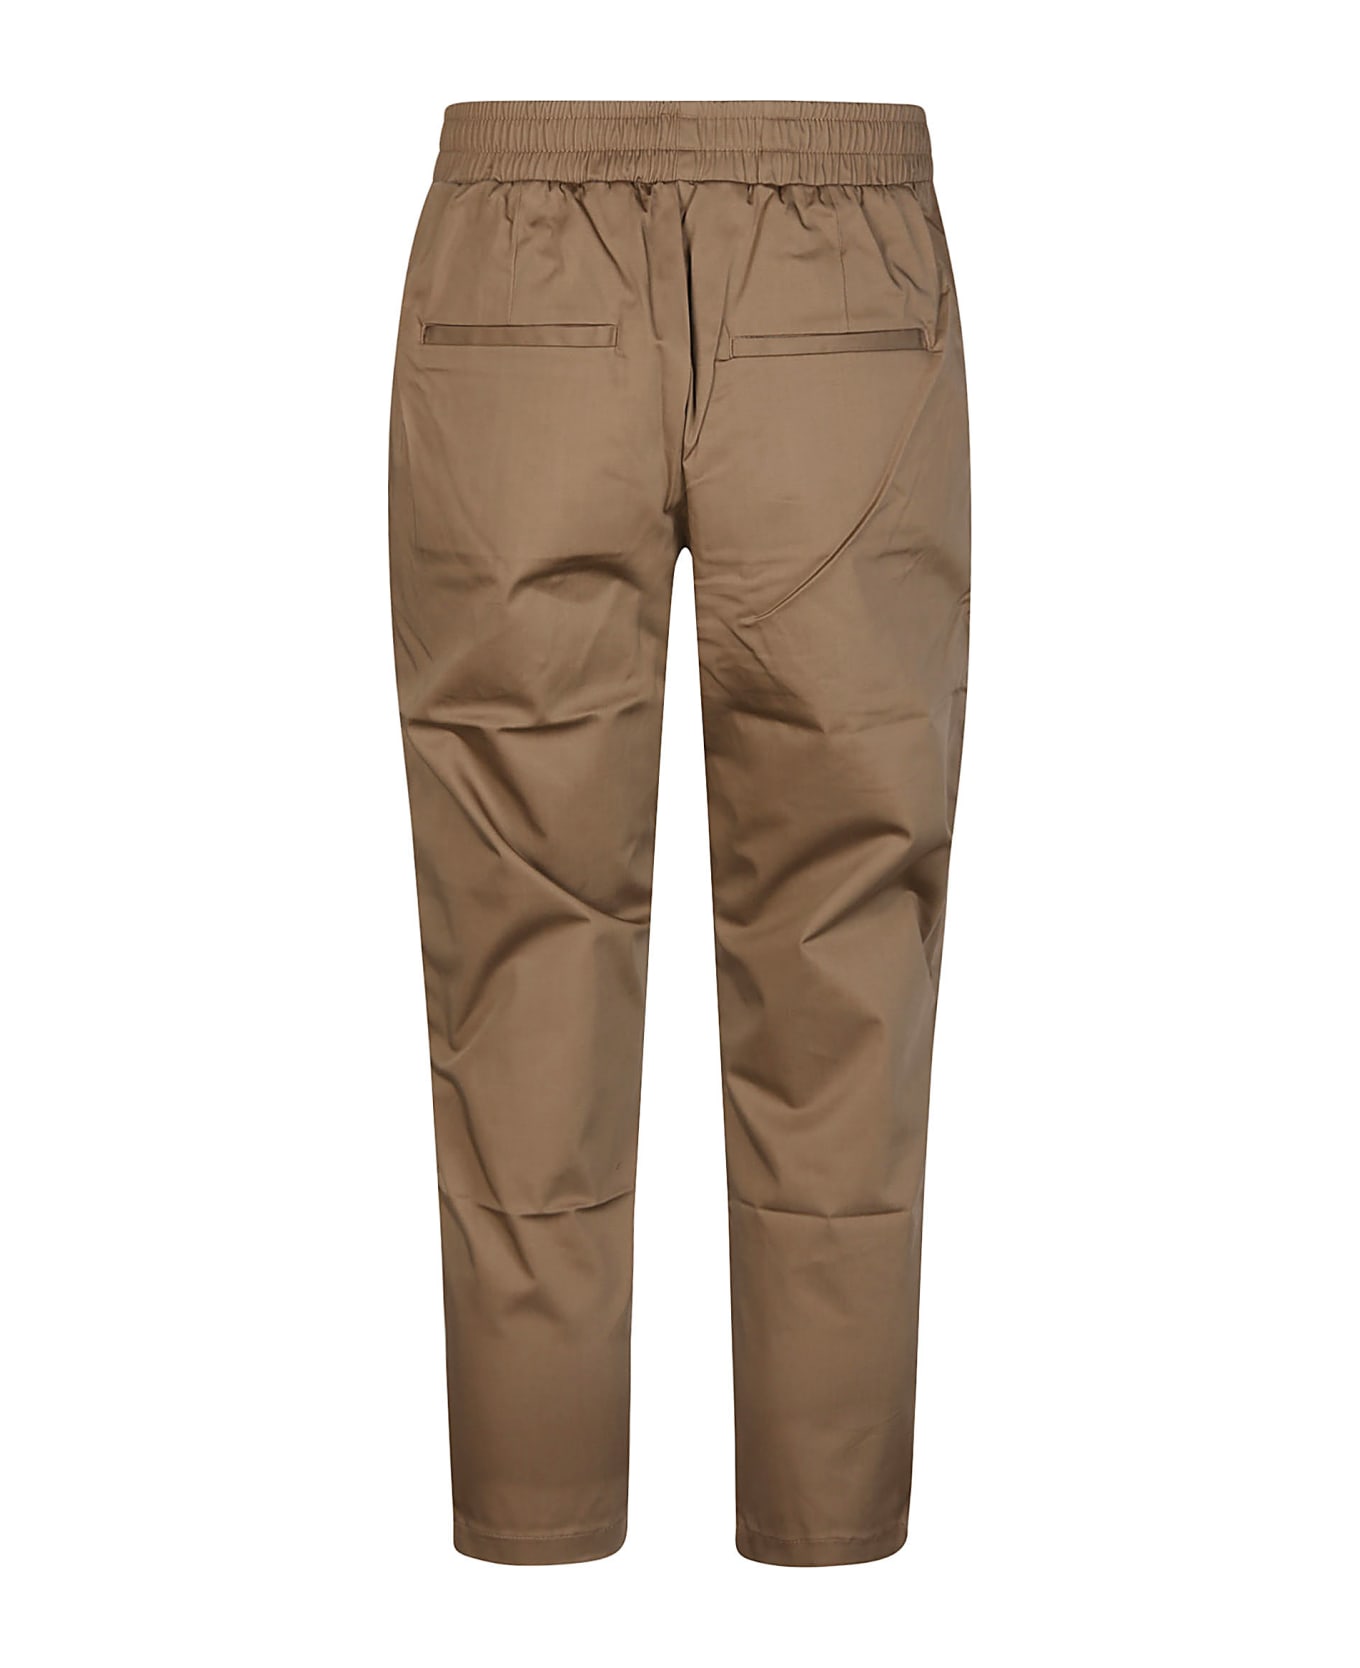 Family First Milano Chino Pant - Beige